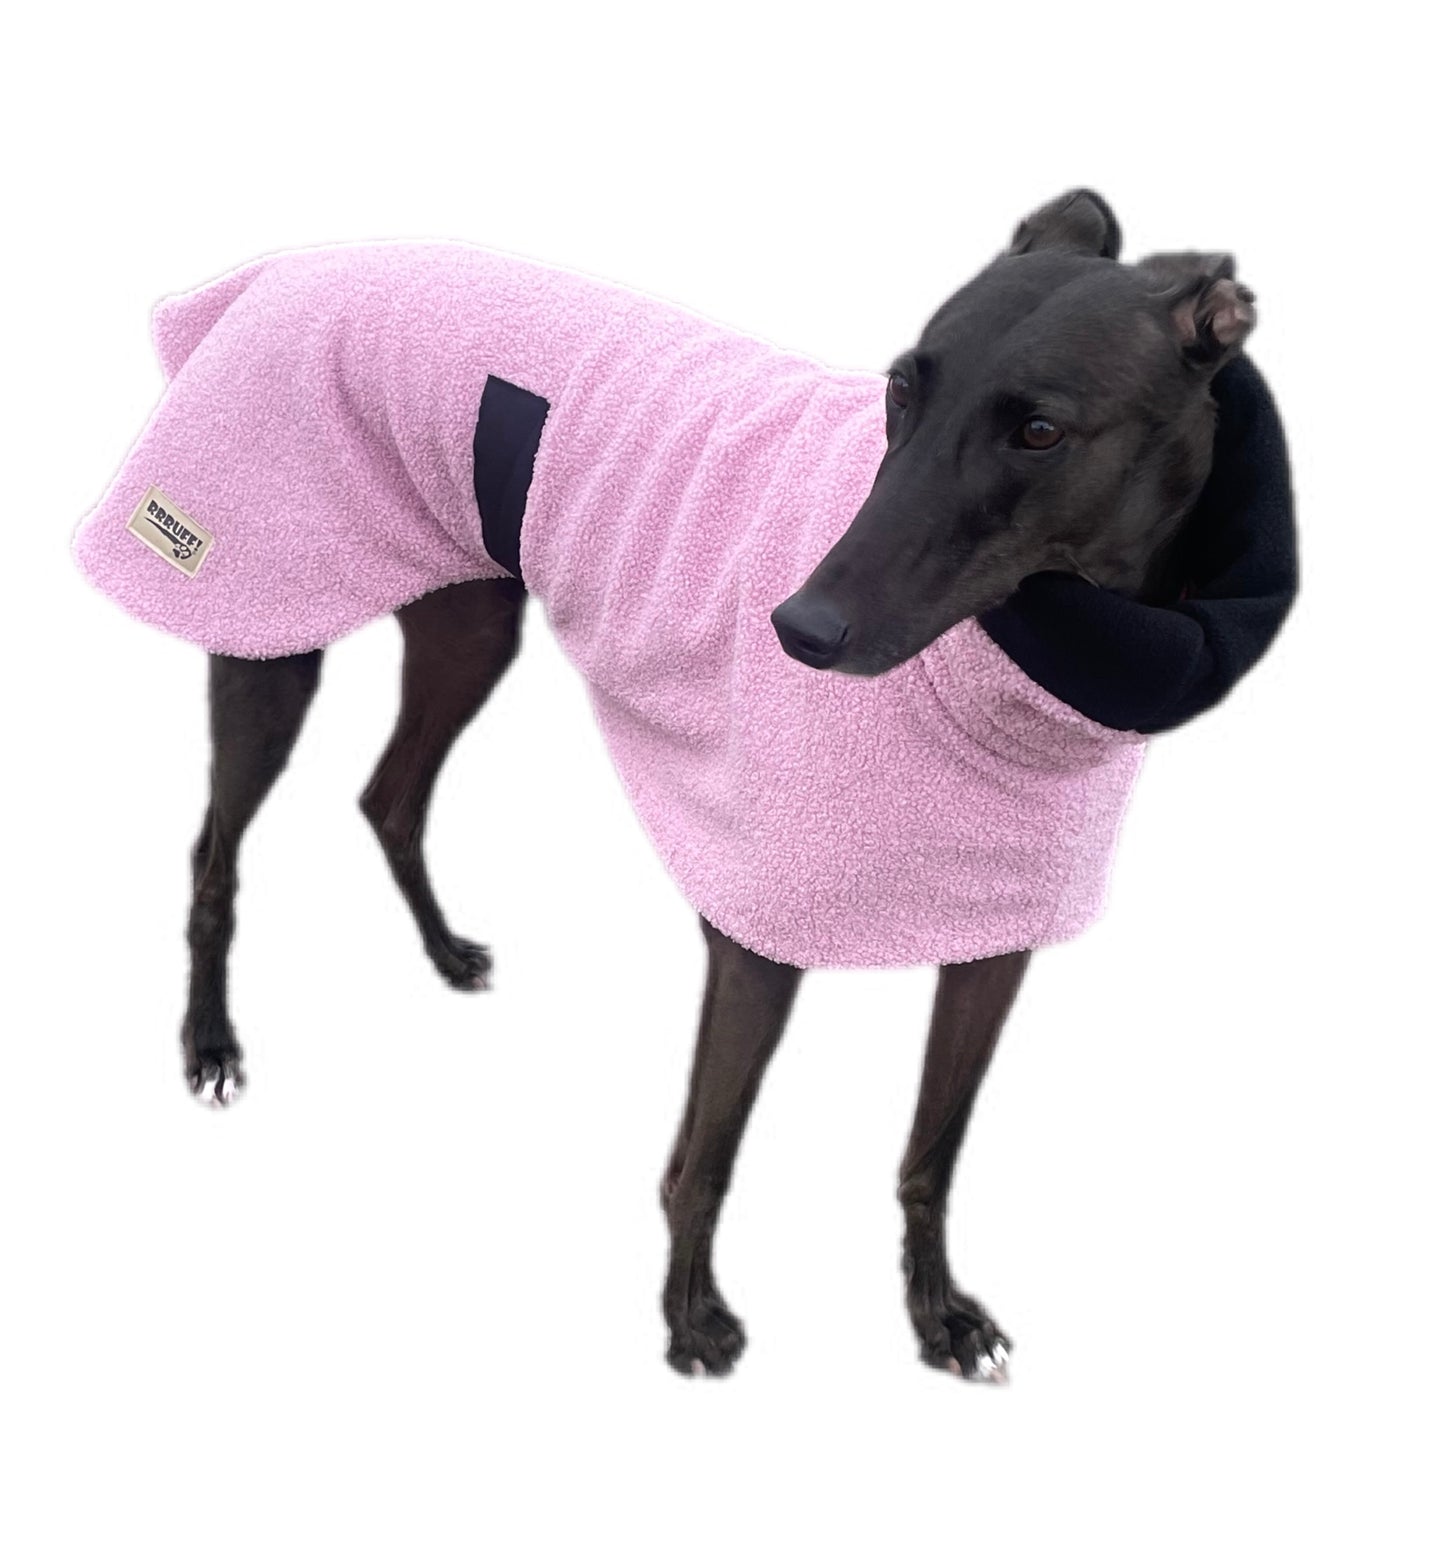 Pink blush Teddy fleece extra thick deluxe style greyhound coat with snuggly wide neck roll